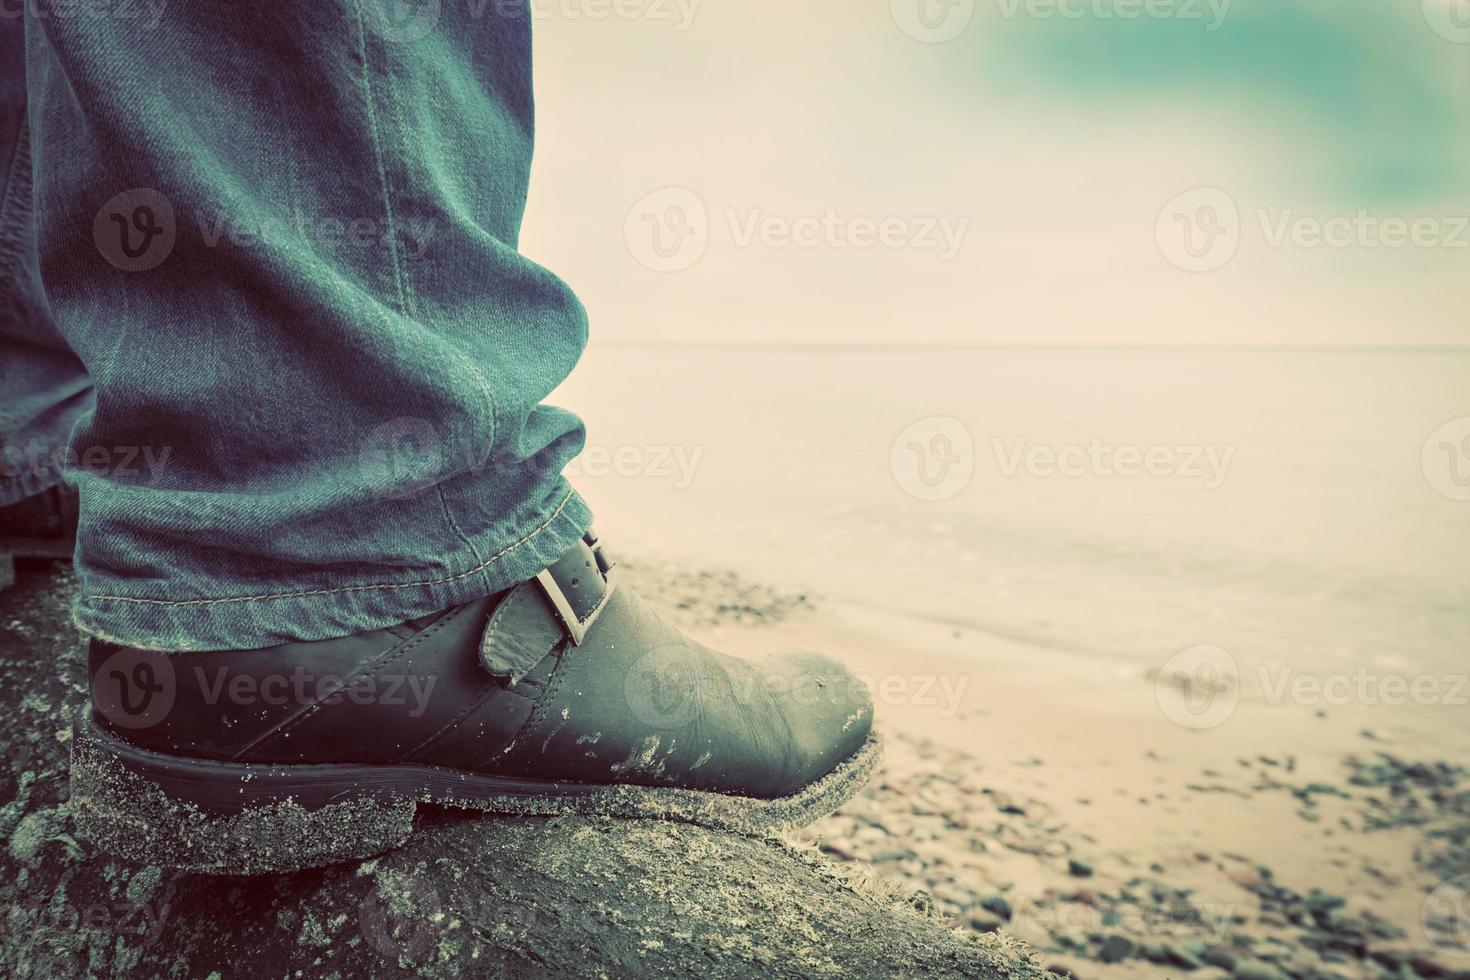 Man in jeans and elegant shoes standing on fallen tree on wild beach looking at sea. Vintage photo